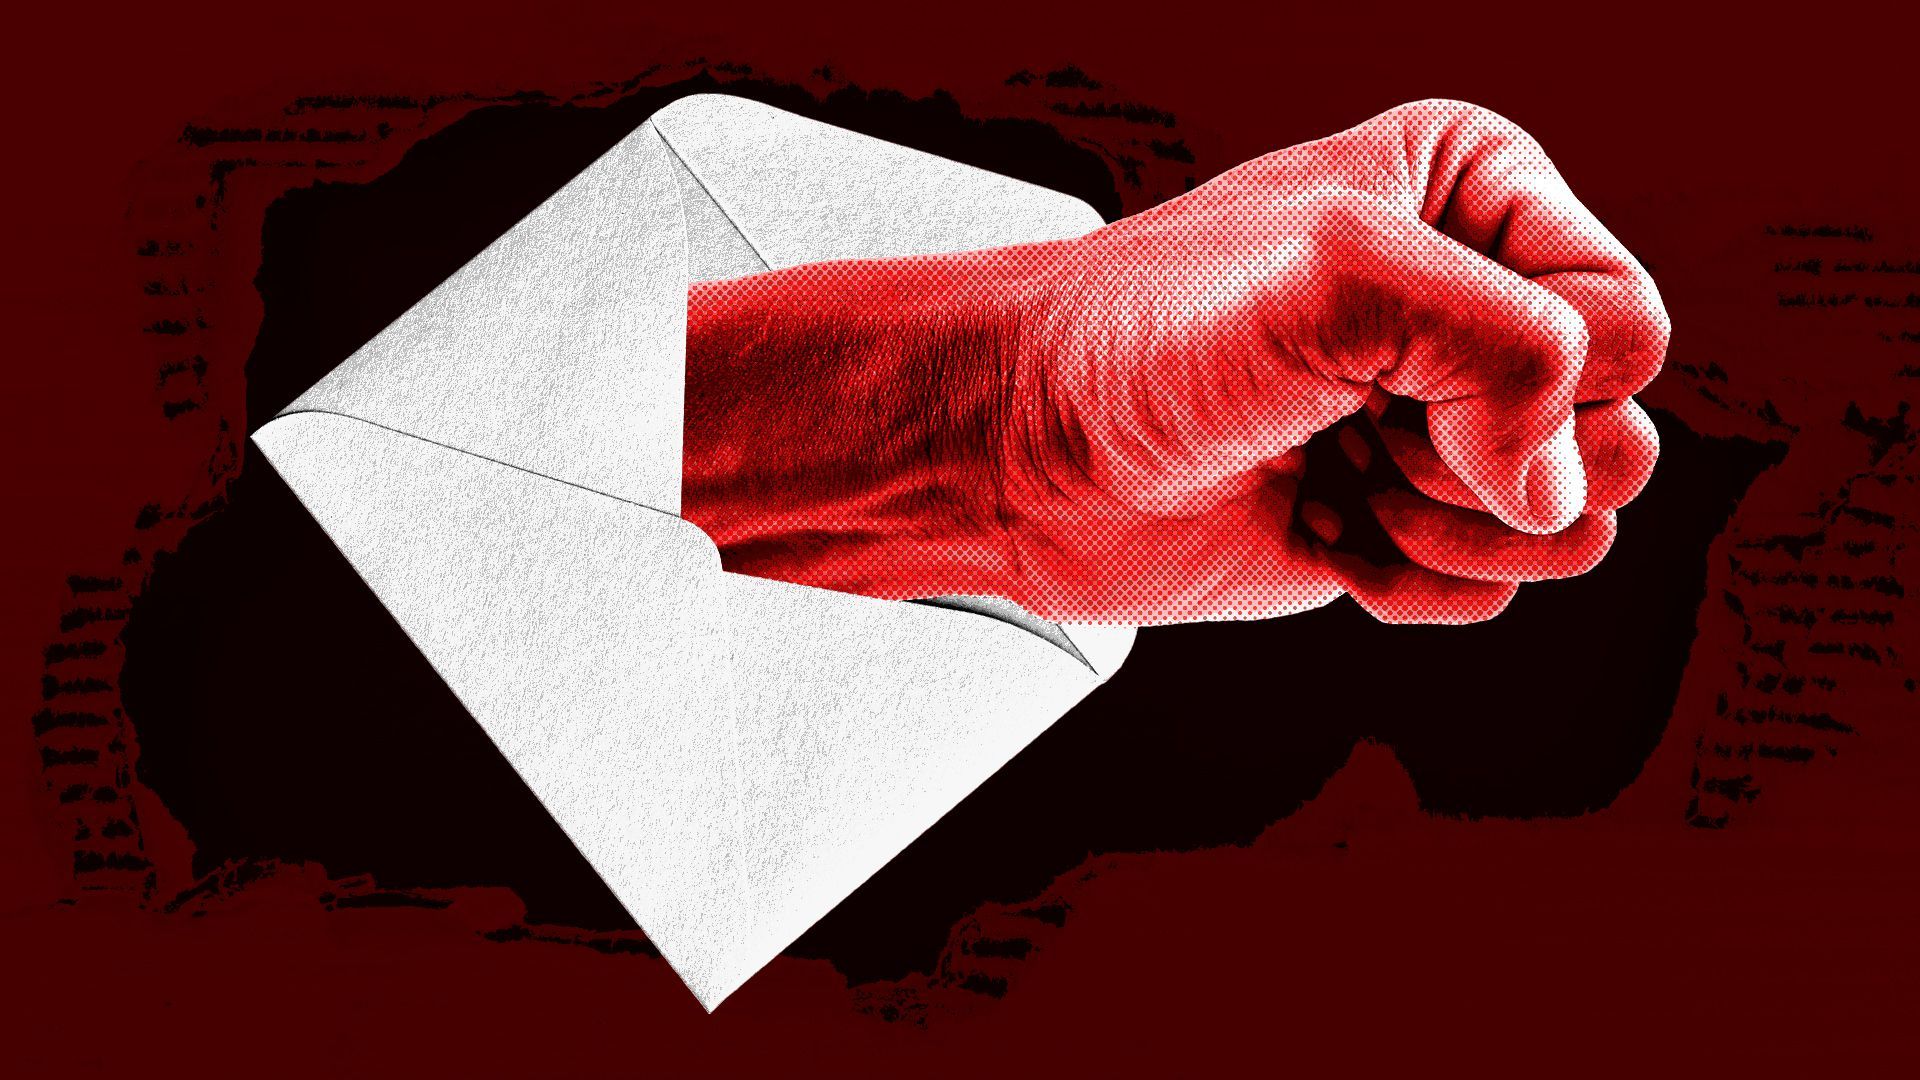 Illustration collage of a fist extending from an open envelope